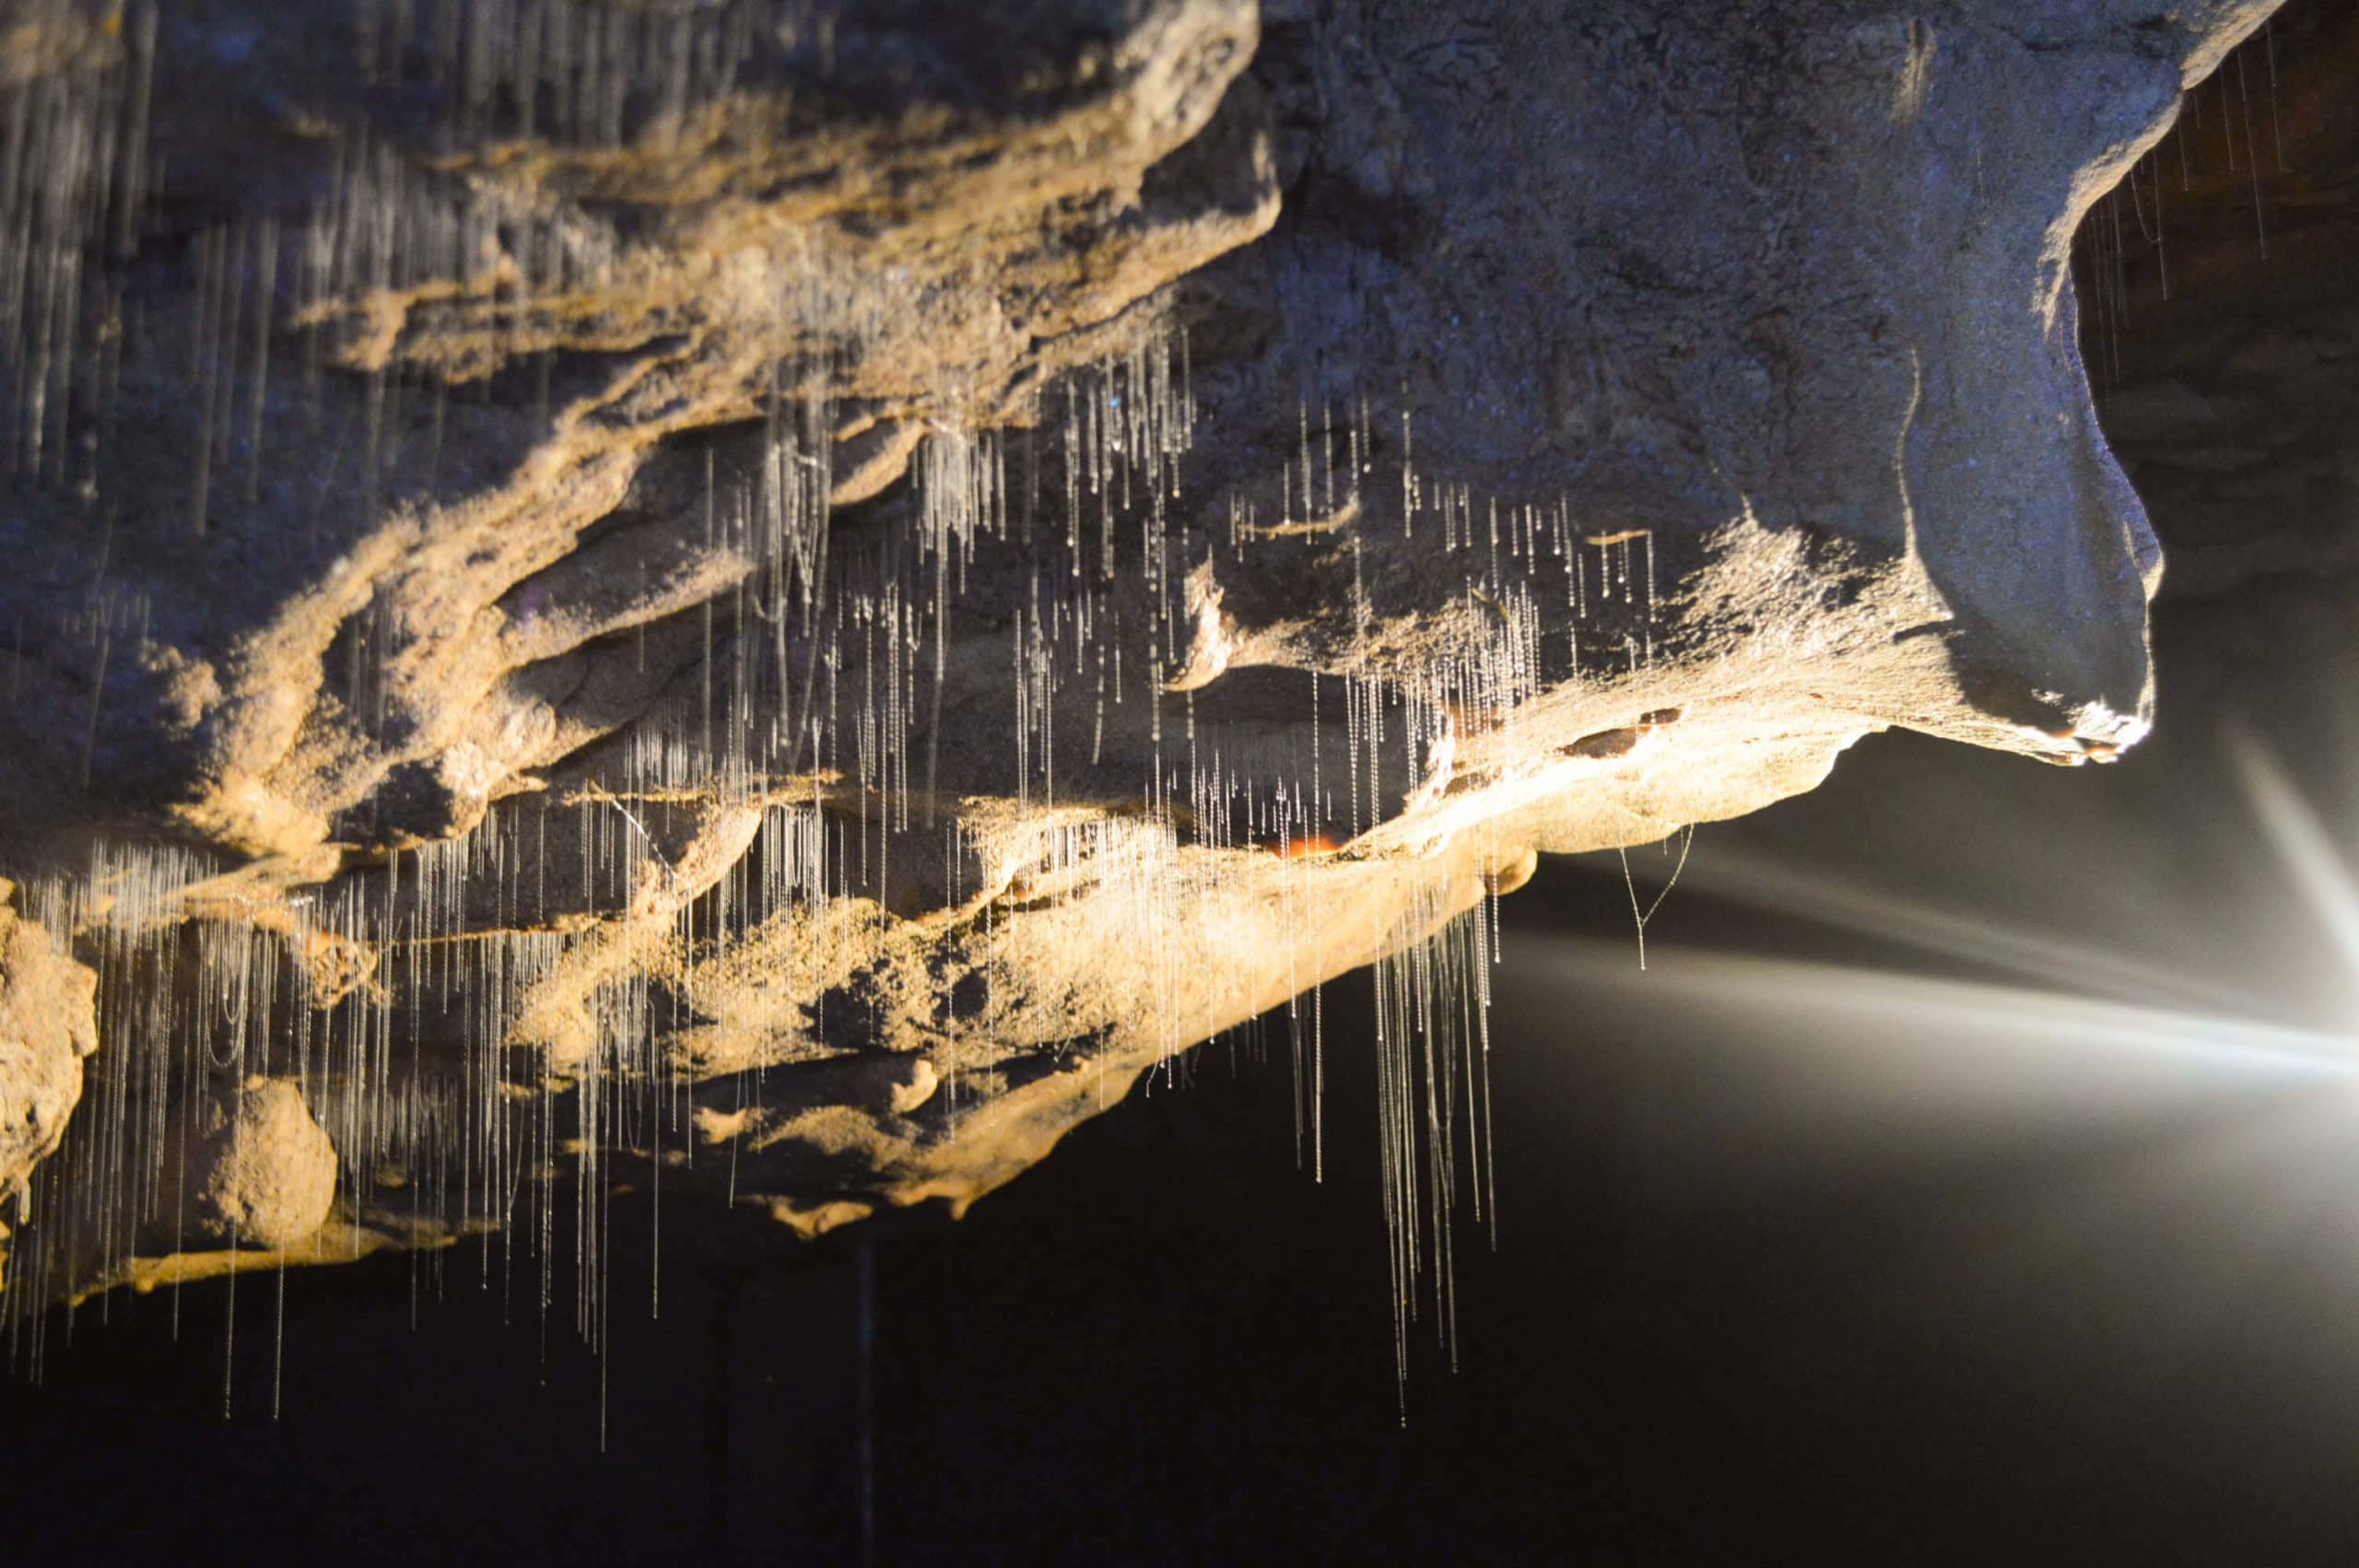 Discover 20 of the most unforgettable travel experiences in the world - Spelunking and rafting in Waitomo Glowworm Caves in New Zealand